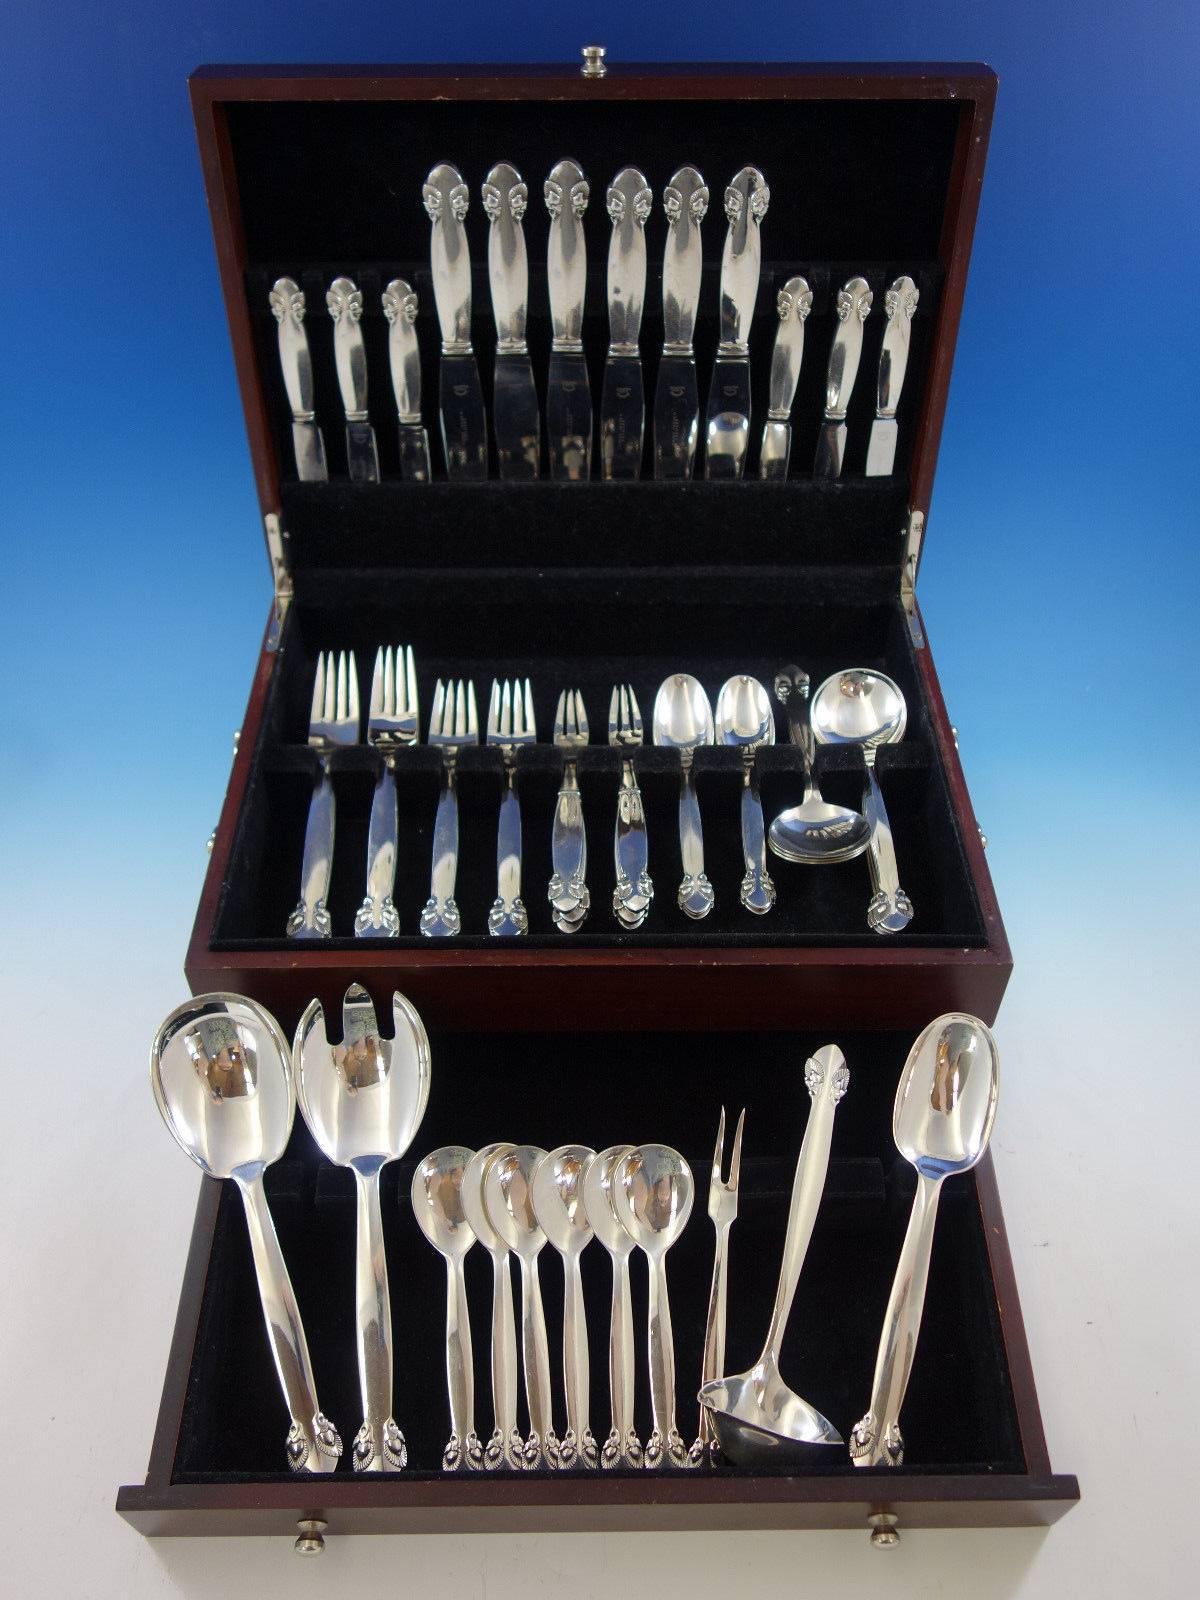 Dinner size Bittersweet by Georg Jensen sterling silver flatware set - 53 pieces. This set includes: 

Six dinner knives, 9